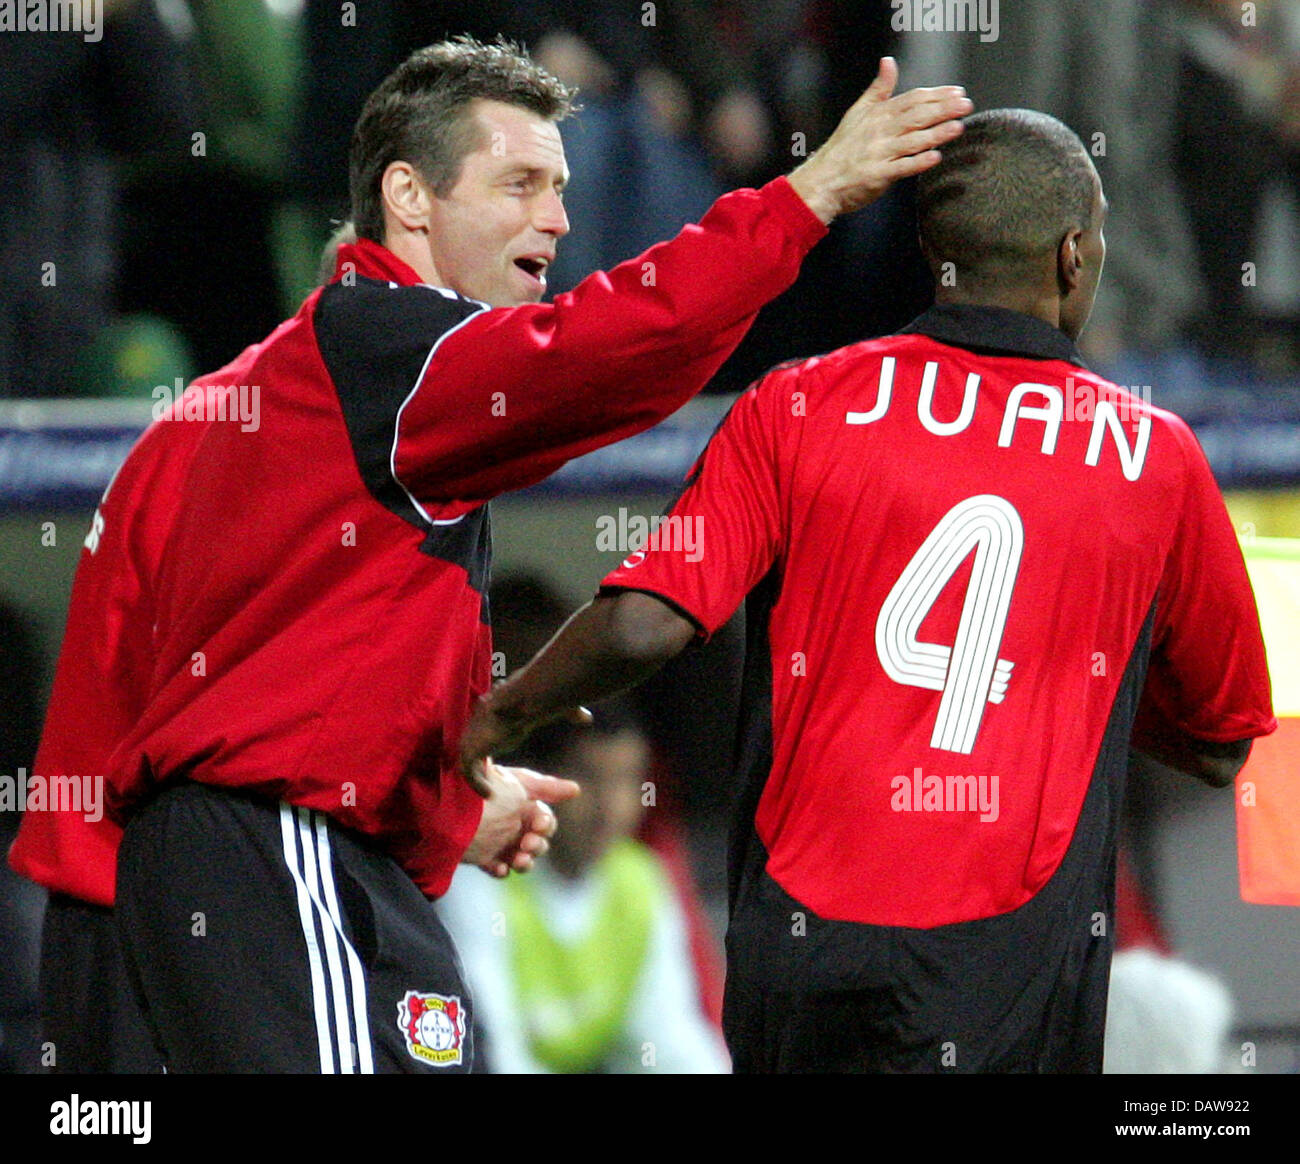 Bayer 04 Leverkusen's head coach Michael Skibbe (L) congratulates Juan for his 3-0 goal during the UEFA Cup round of 16 second leg against RC Lens at the BayArena stadium in Leverkusen, Germany, Wednesday, 14 March 2007. Goals from Voronin, Barbarez and Juan gave the Germans a 4-2 aggregate victory to qualify for the quarter finals of the competition. Photo: Rolf Vennenbernd Stock Photo